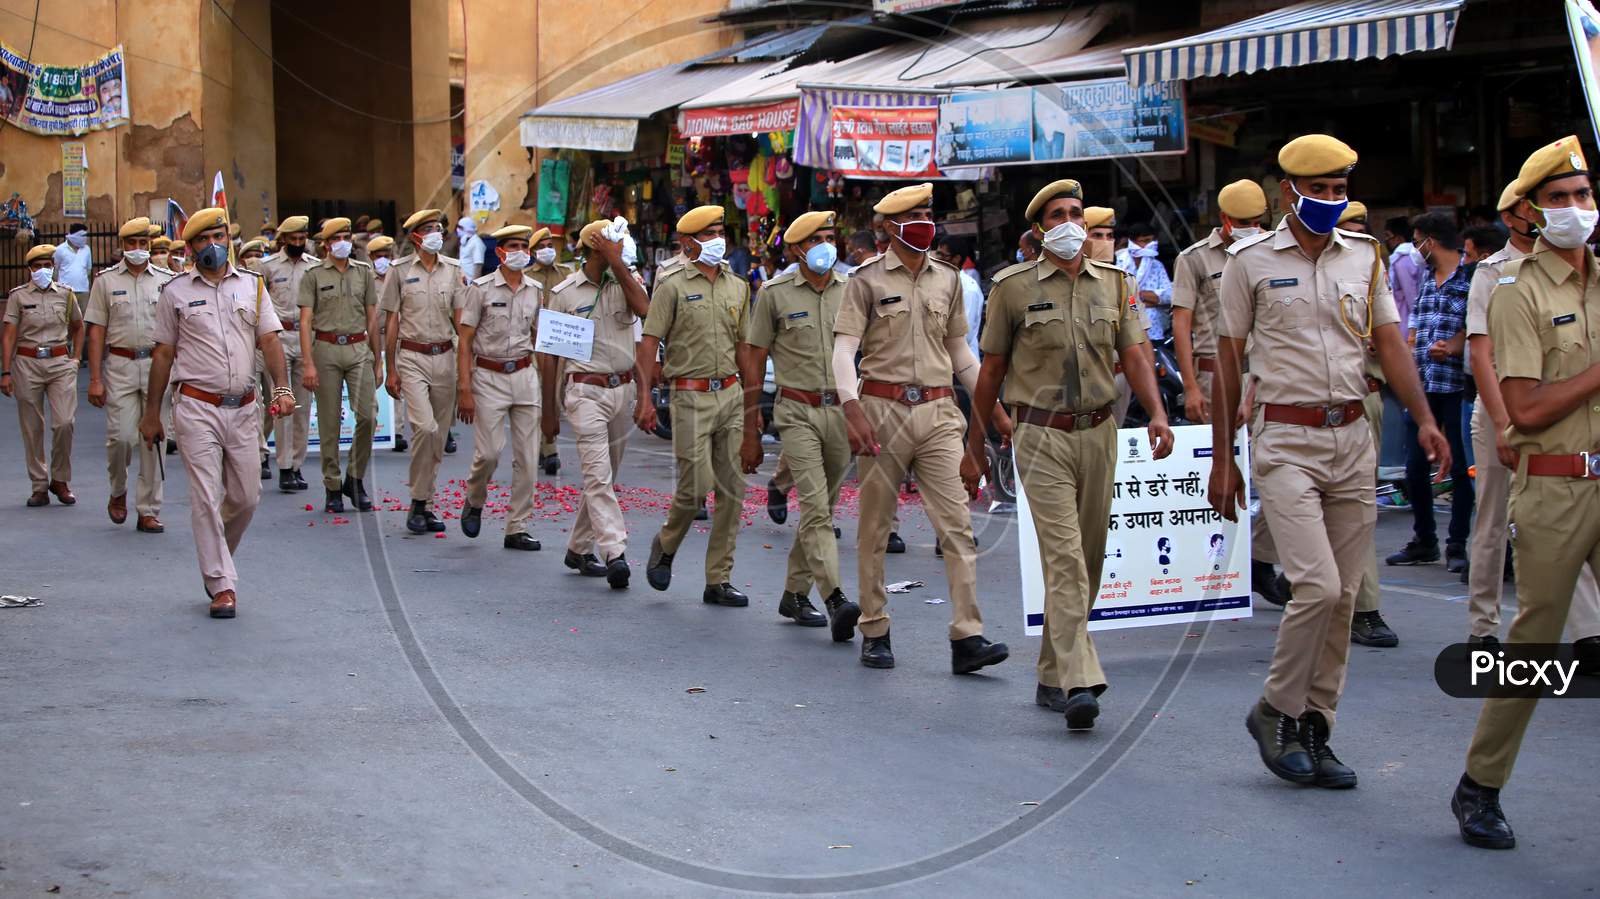 Policemen wear masks and hold banners to spread awareness on Covid-19 during a flag march organized in Ajmer, Rajasthan on July 02, 2020.